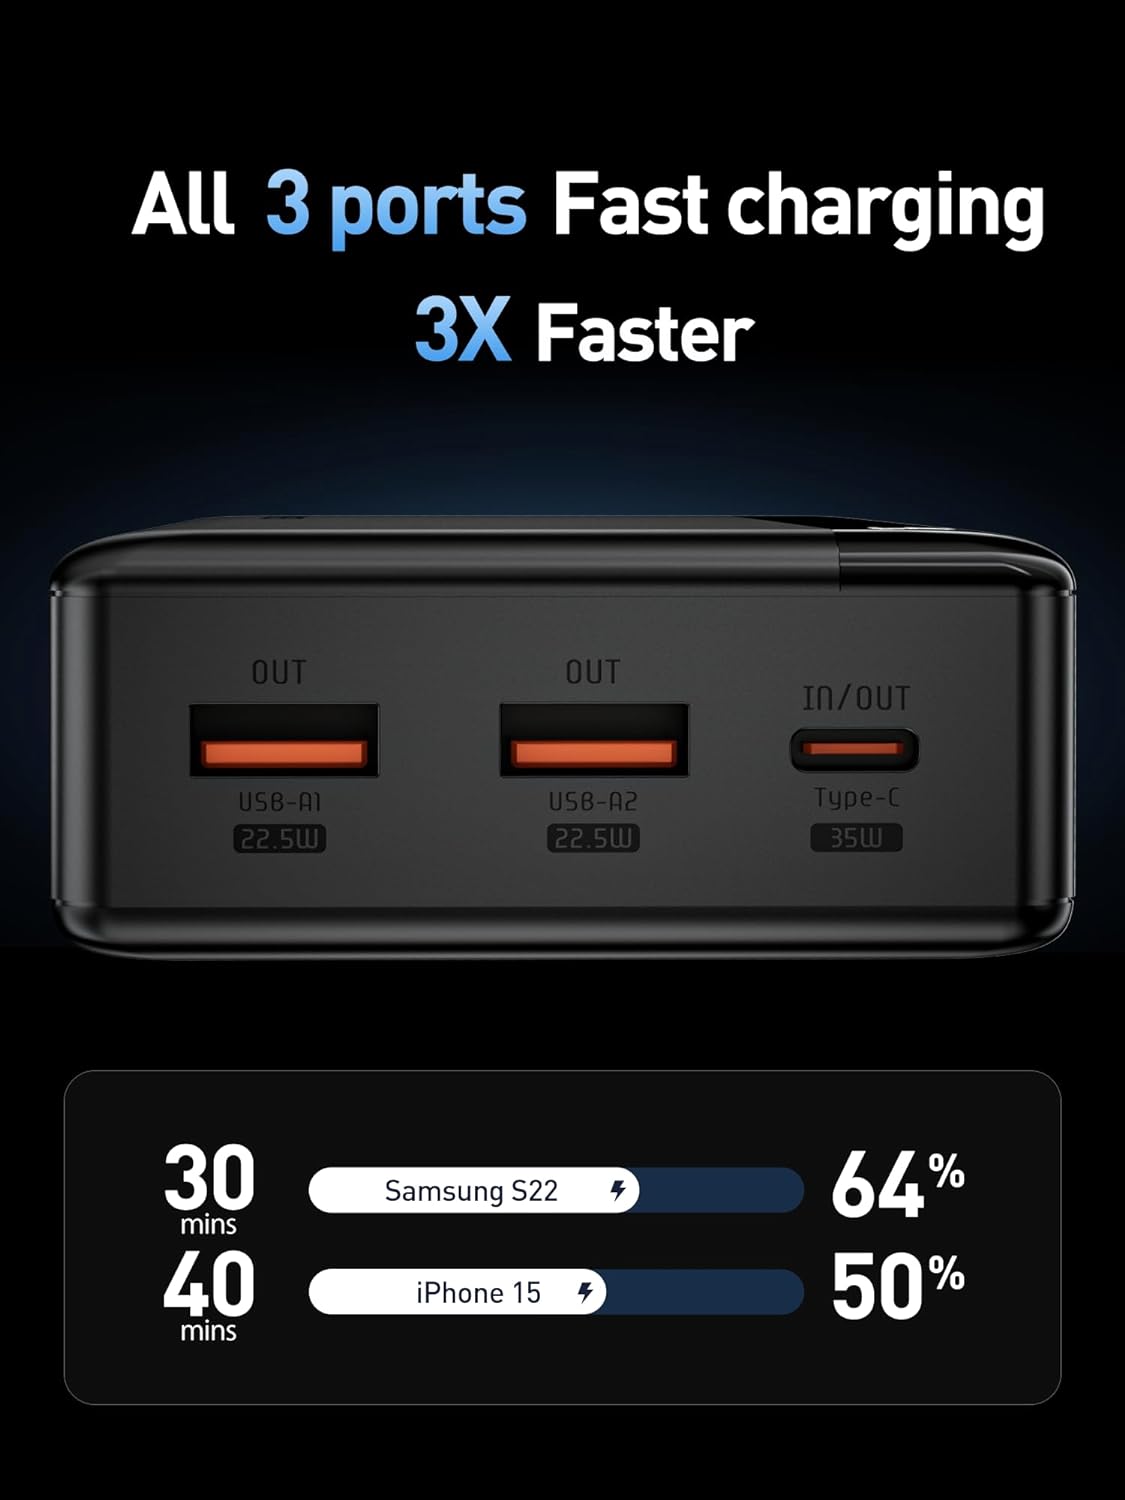 MOVE SPEED Portable Charger 35W, 20000mAh Power Bank Fast Charging USB C in&Out PD3.0 QC4.0, LED Digital Display, Battery Pack Compatible with iPhone 15/14/13/12, iPad, Samsung, AirPods, Laptop, etc - MOVESPEED